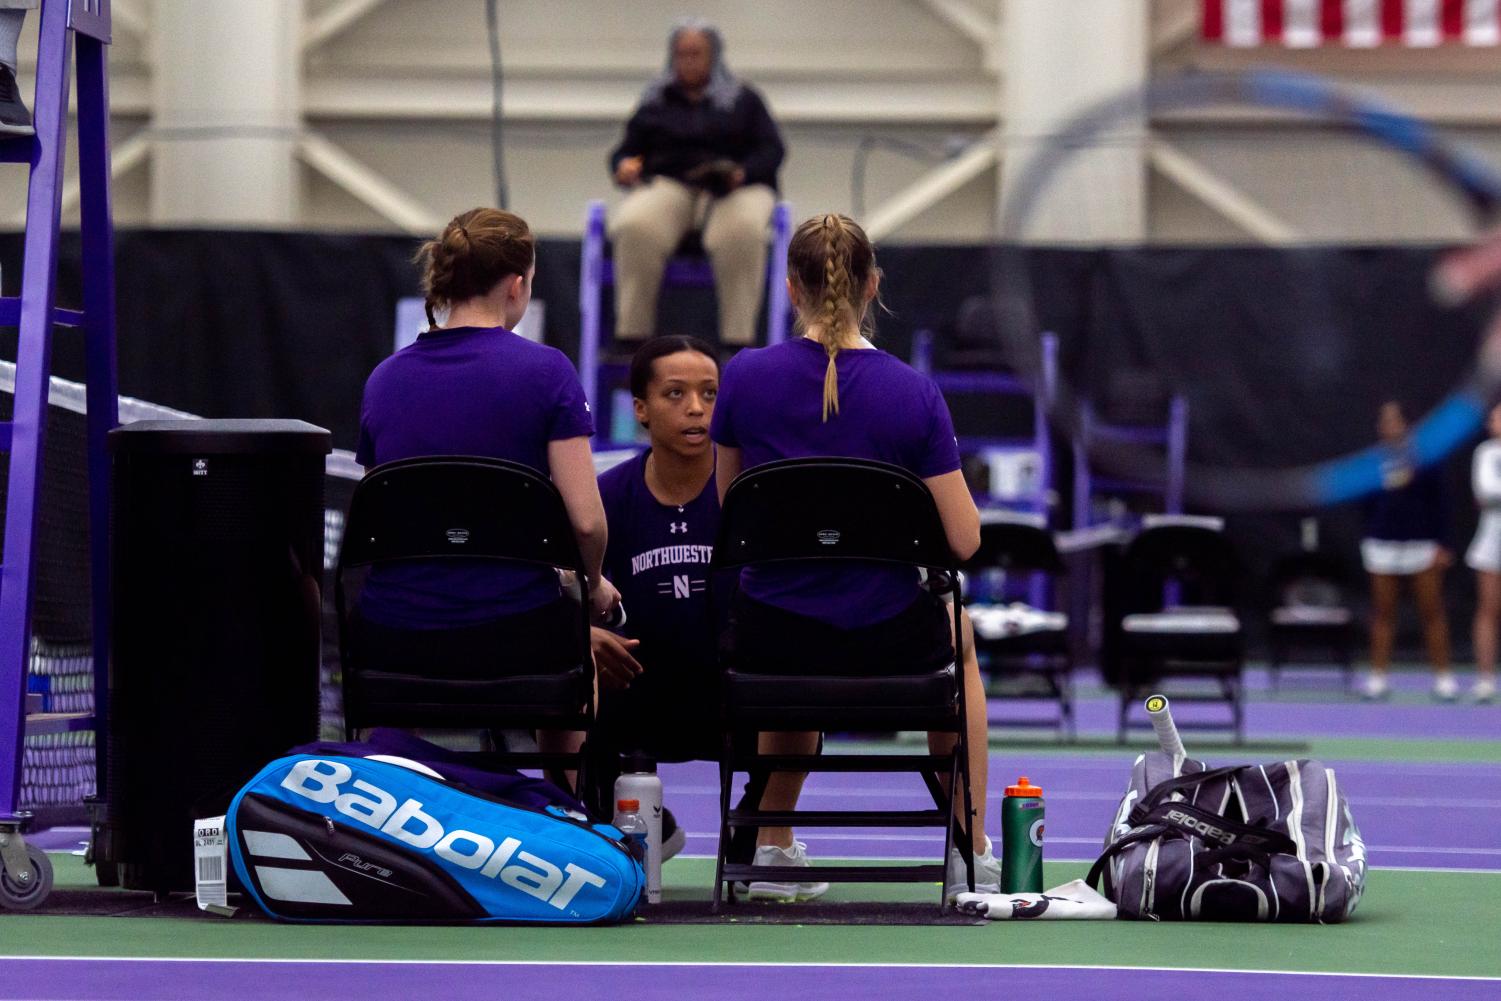 Two+tennis+players+in+purple+shirts+sit+during+a+match.